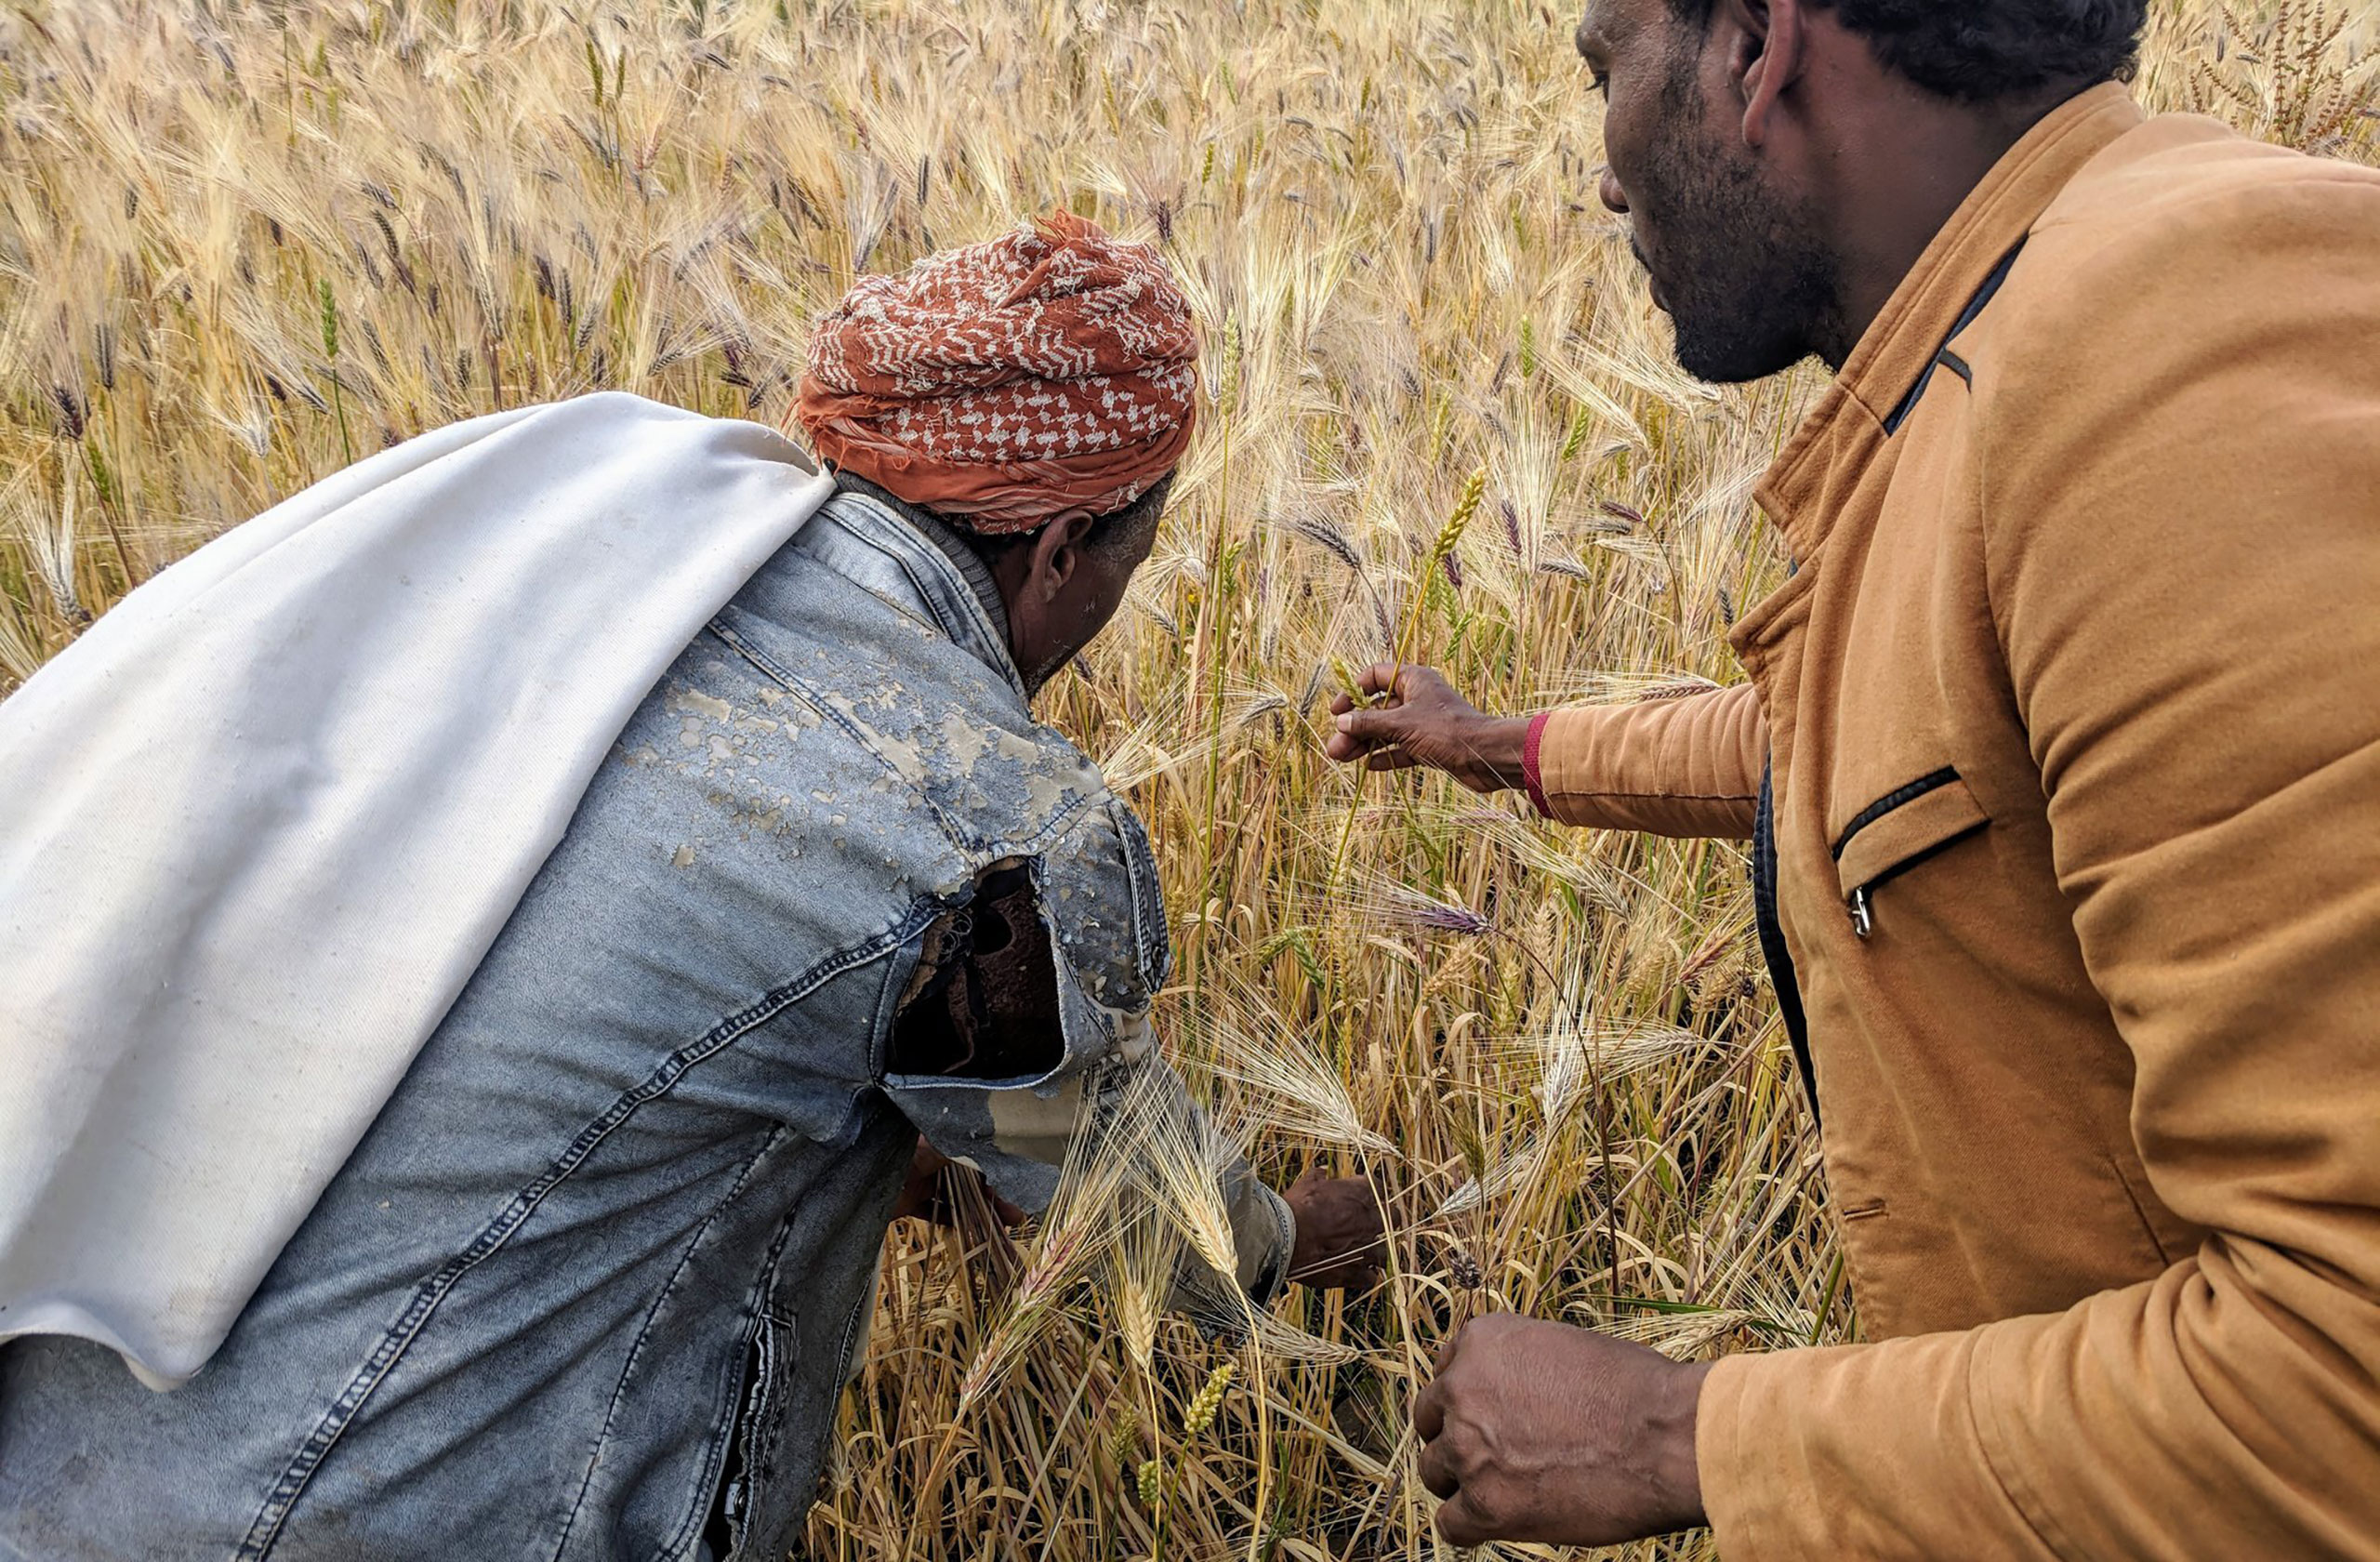 Farmer Hasan Abagaz and researcher Seid Hassen examine a traditional mixture of wheat and barley in Kutabir District, South Wollo, Ethiopia